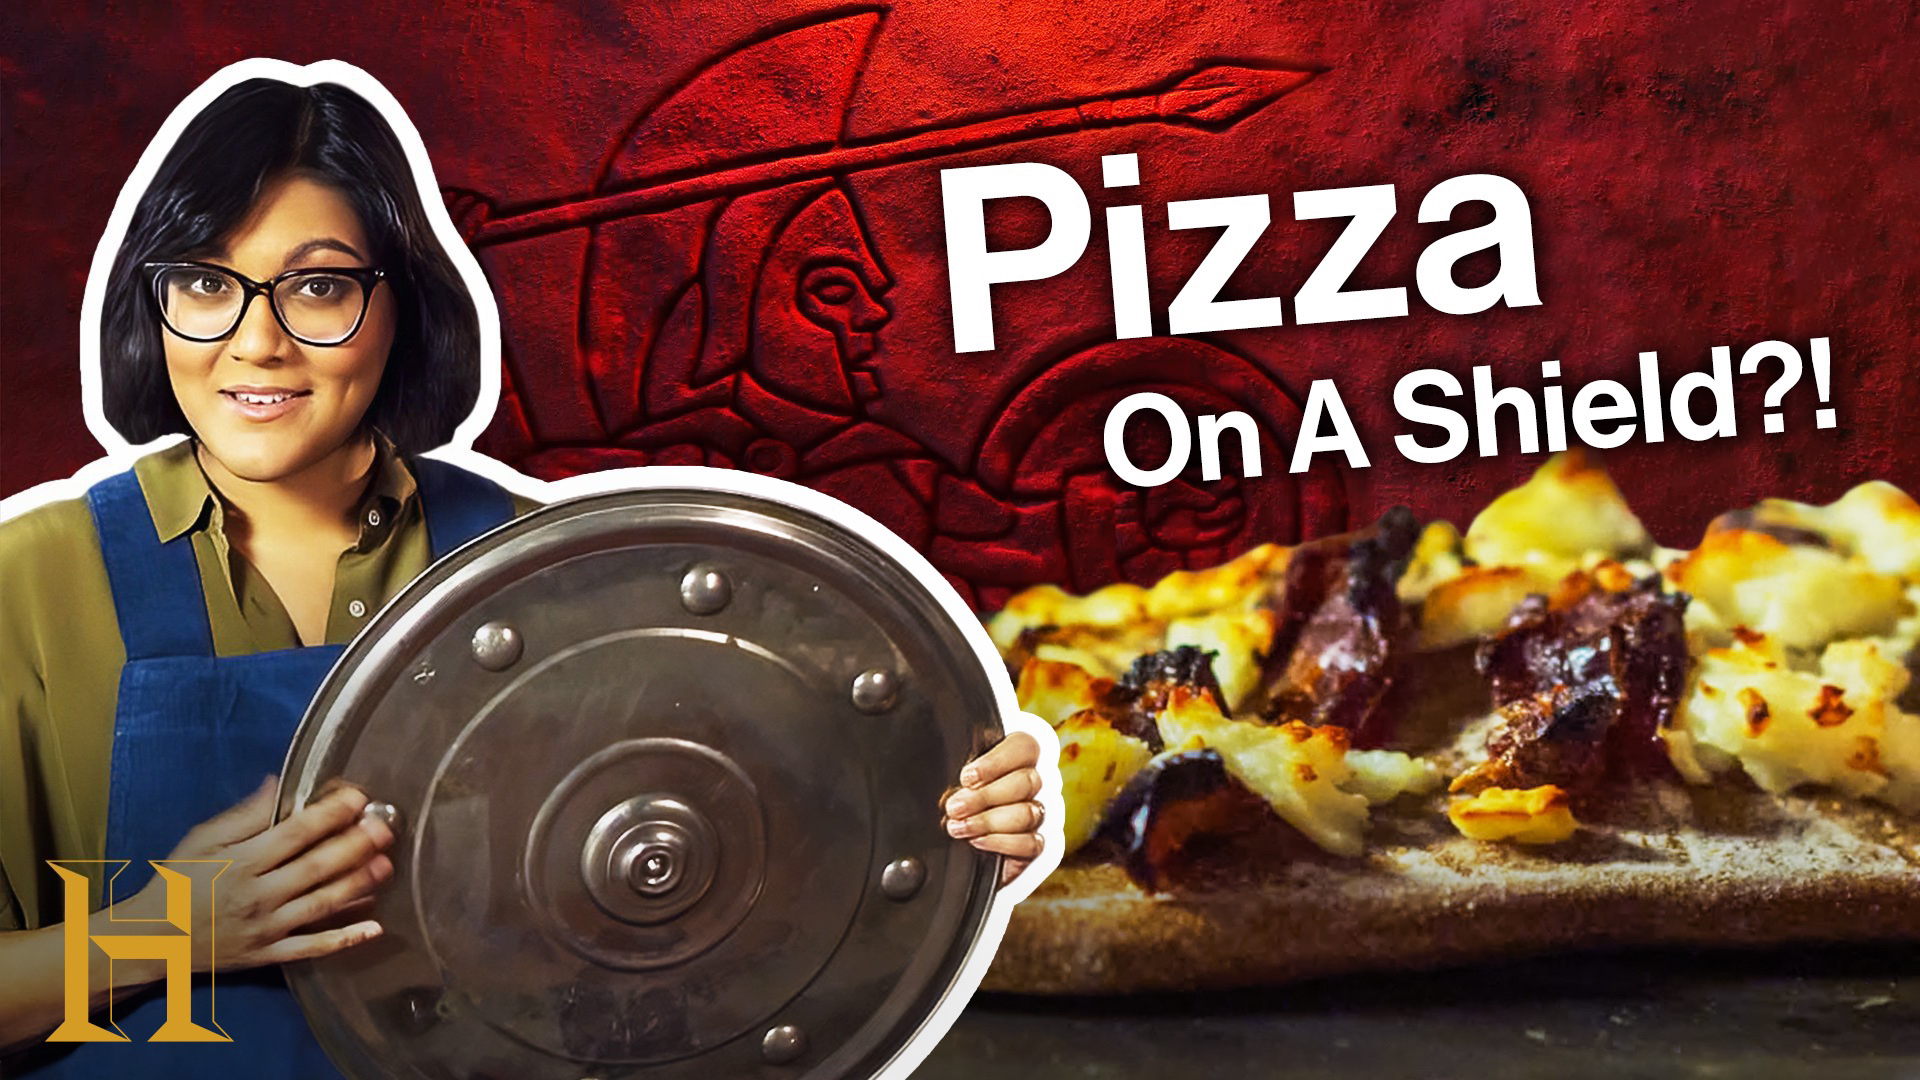 How to Cook Pizza on a Shield Like a 600 BC Persian Soldier